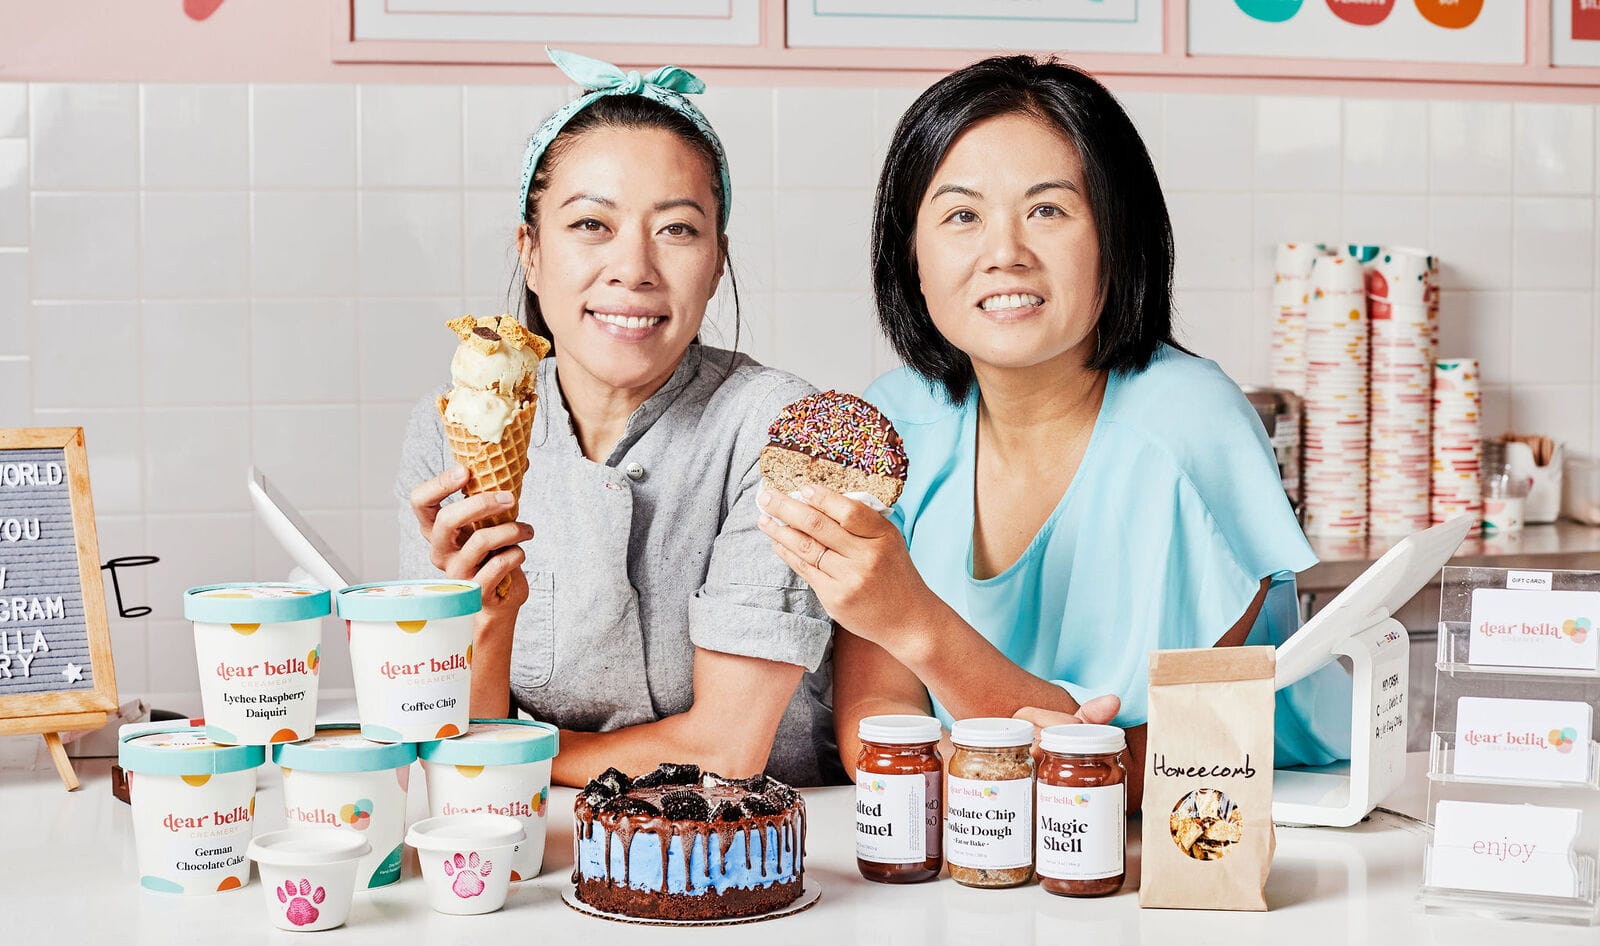 Meet the Women Who Made This Vegan Ice Cream Shop a Hollywood Favorite